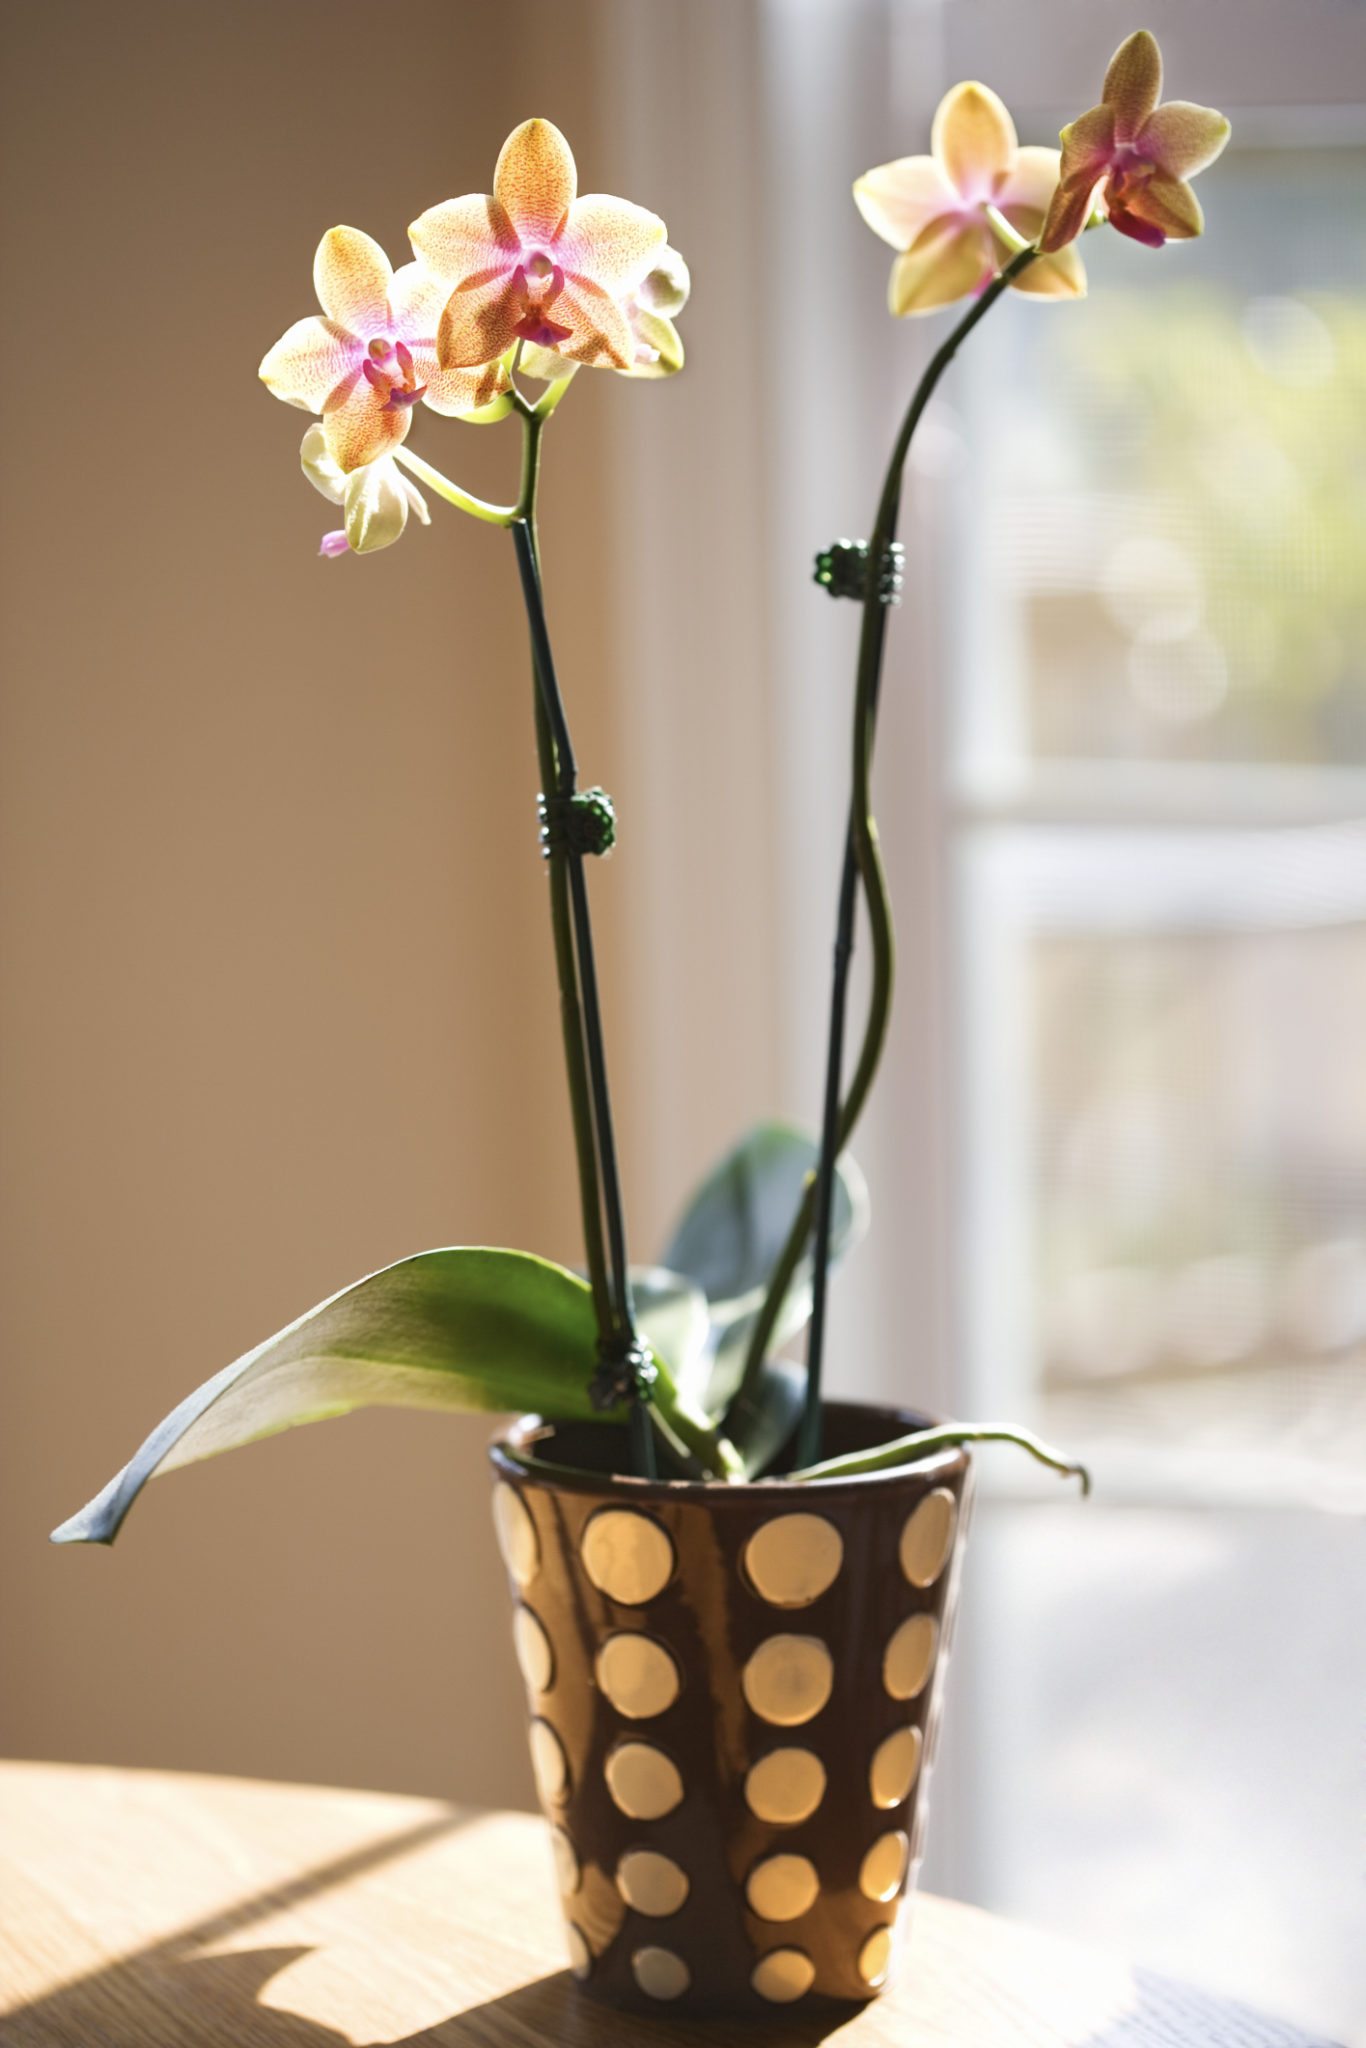 How to grow orchids indoors